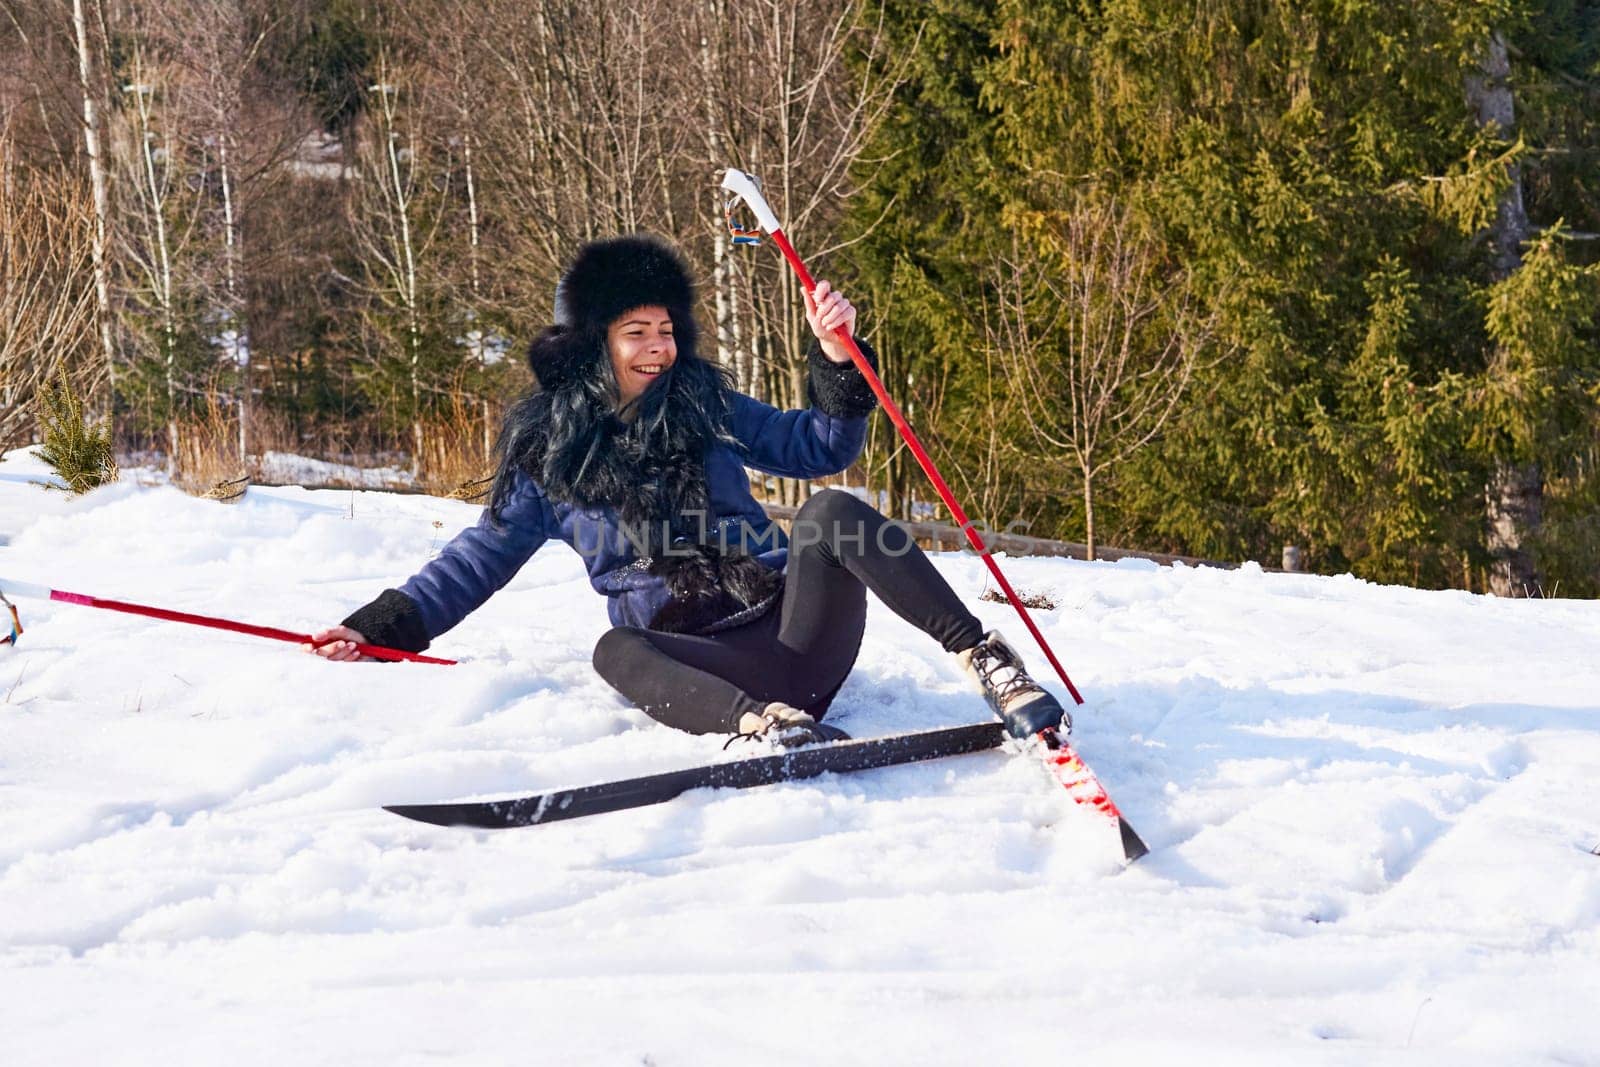 the action of traveling over snow on skis, especially as a sport or recreation. Laughing cheerful young girl fell down while skiing in the forest.